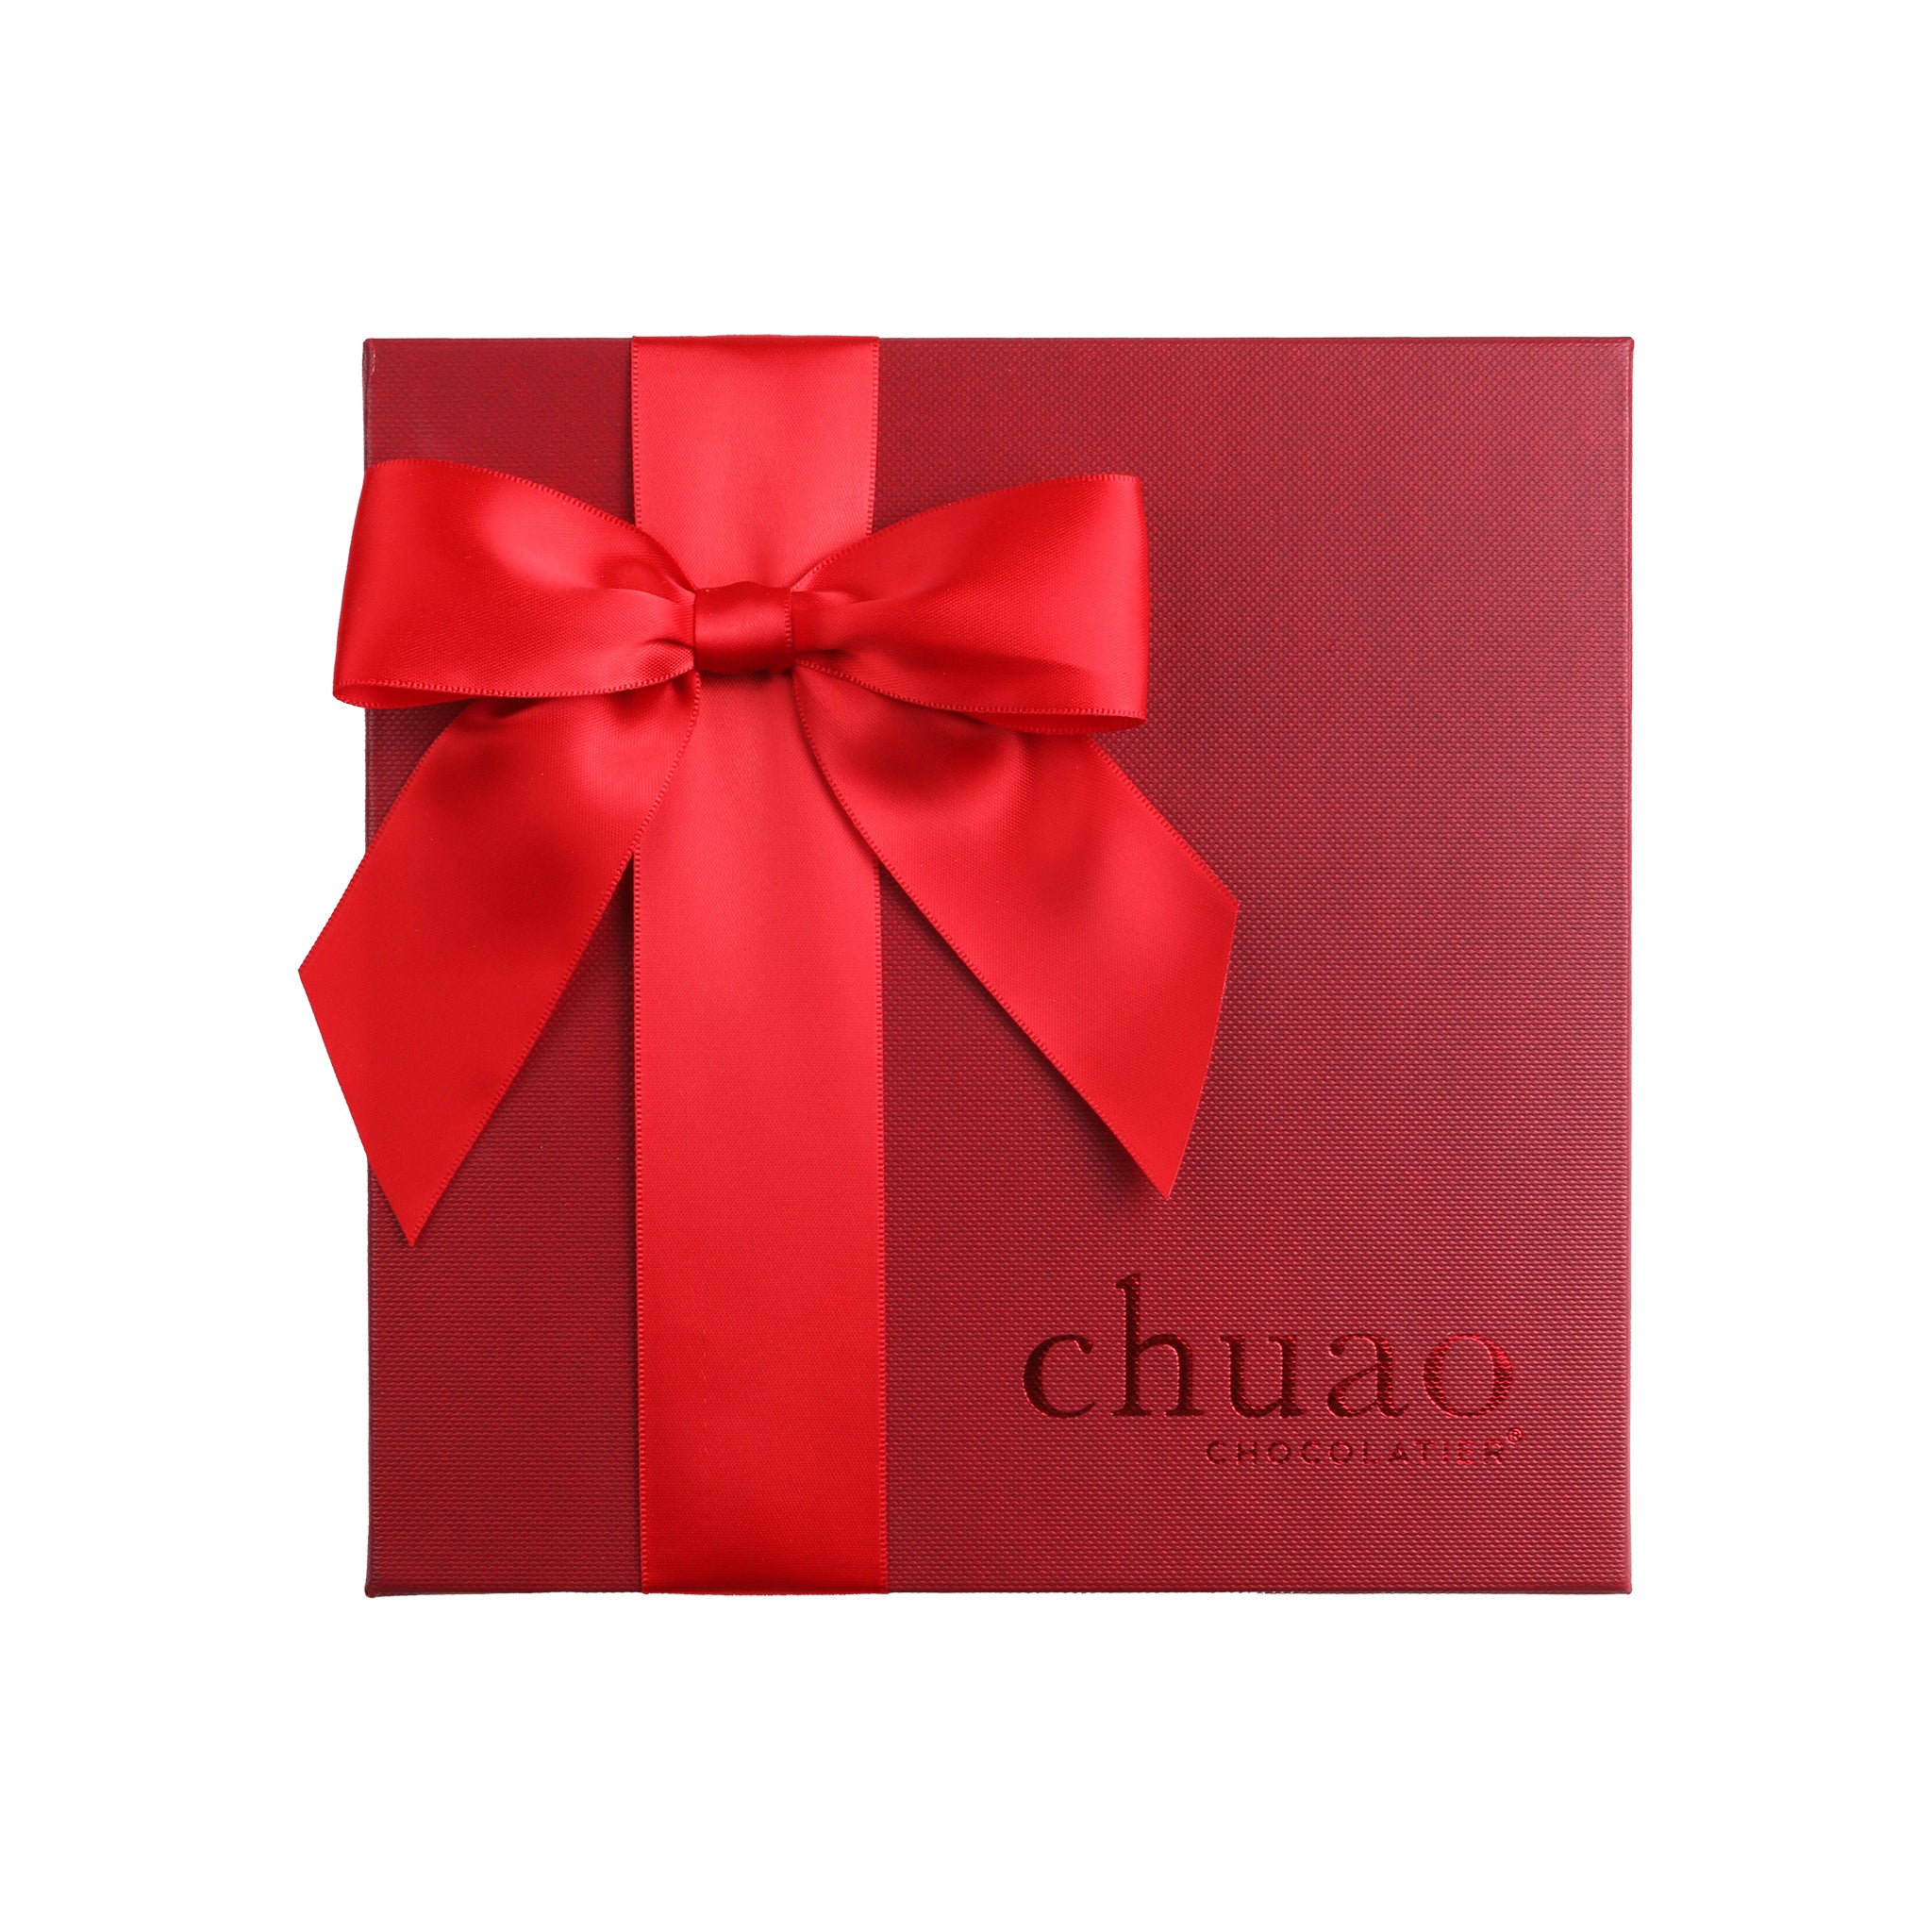 Bright red bow over a deep red gift box engraved with chuao